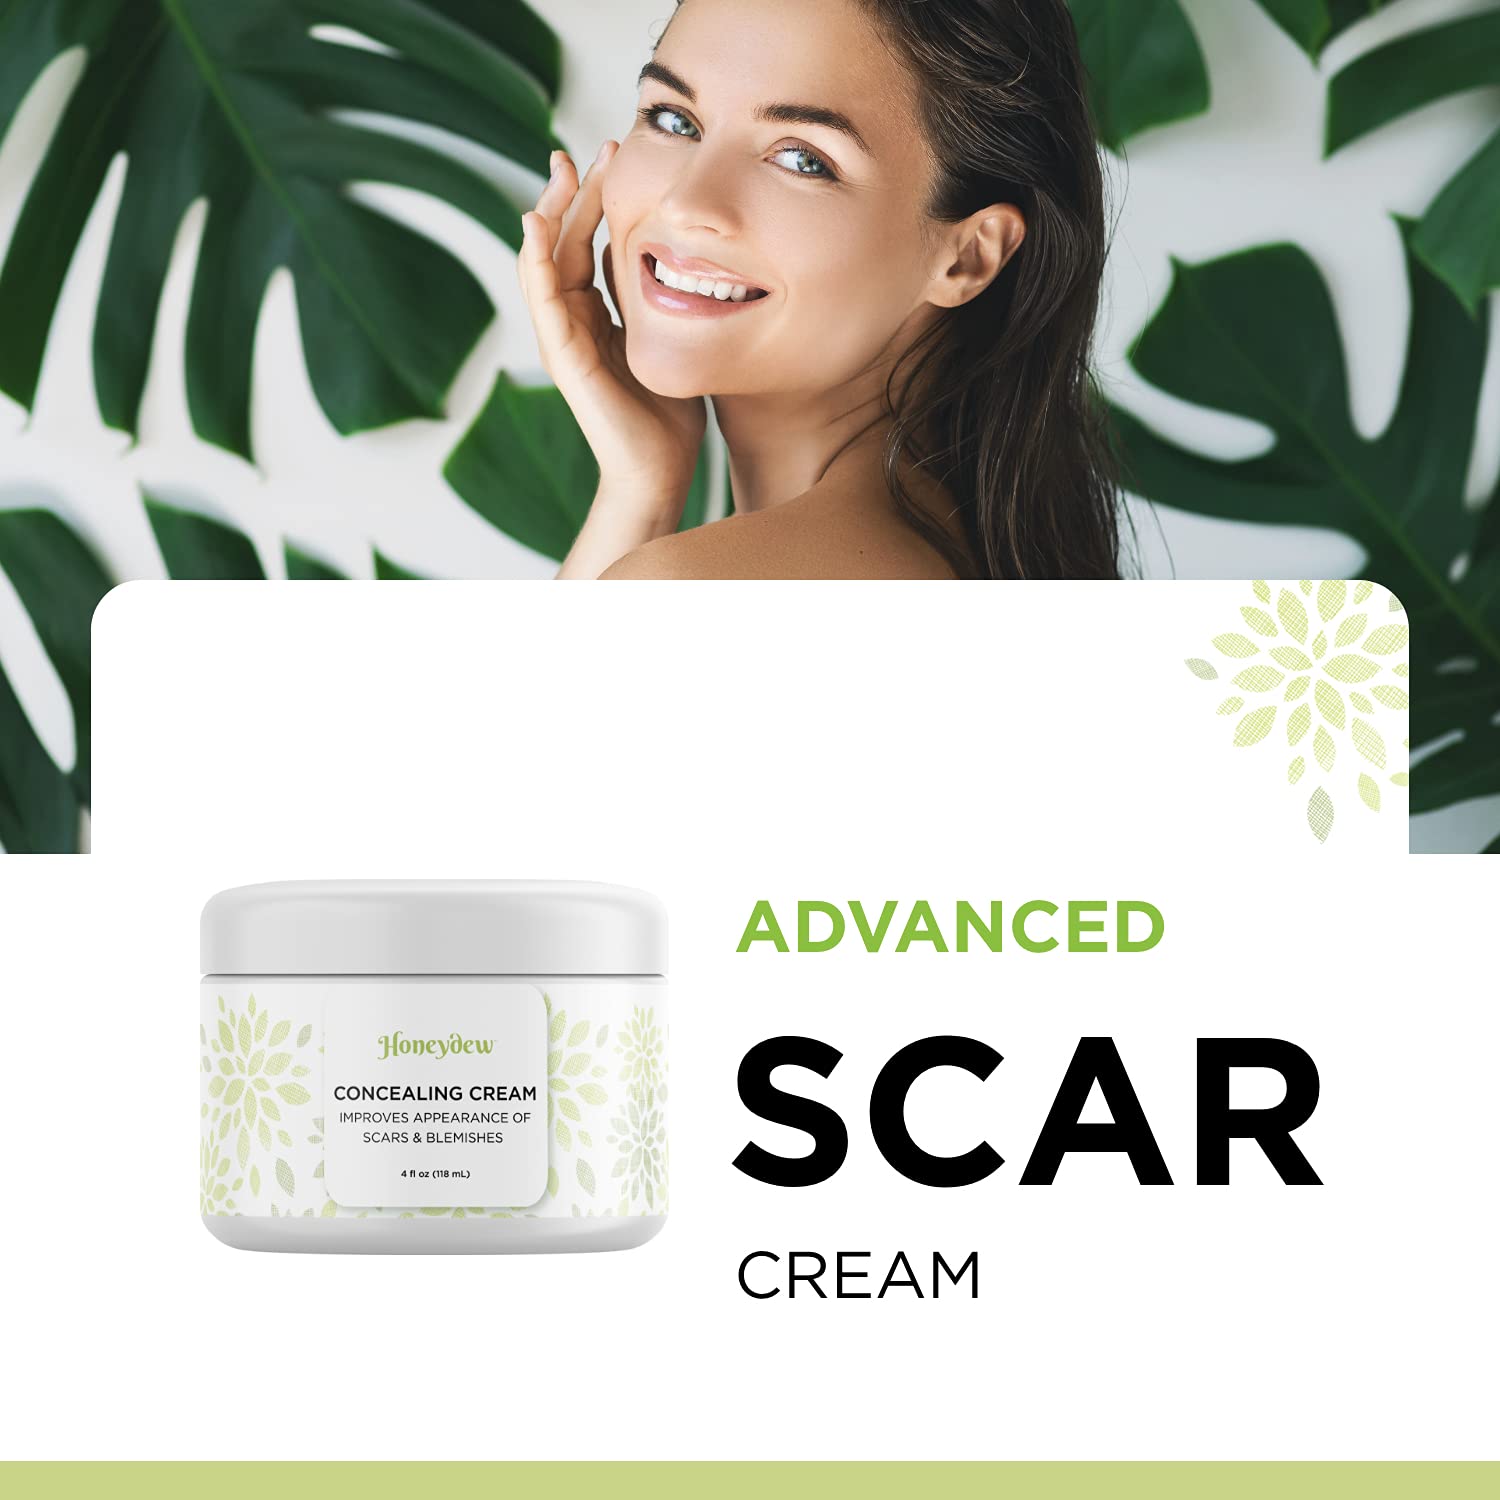 Scar Cream for Face and Body Care - Hydrating Scar Fade Cream and Stubborn Blemish Treatment for Face Care with Nourishing Shea Butter Emollient Cream - Clear Skin Moisturizer for Sensitive Skin Care